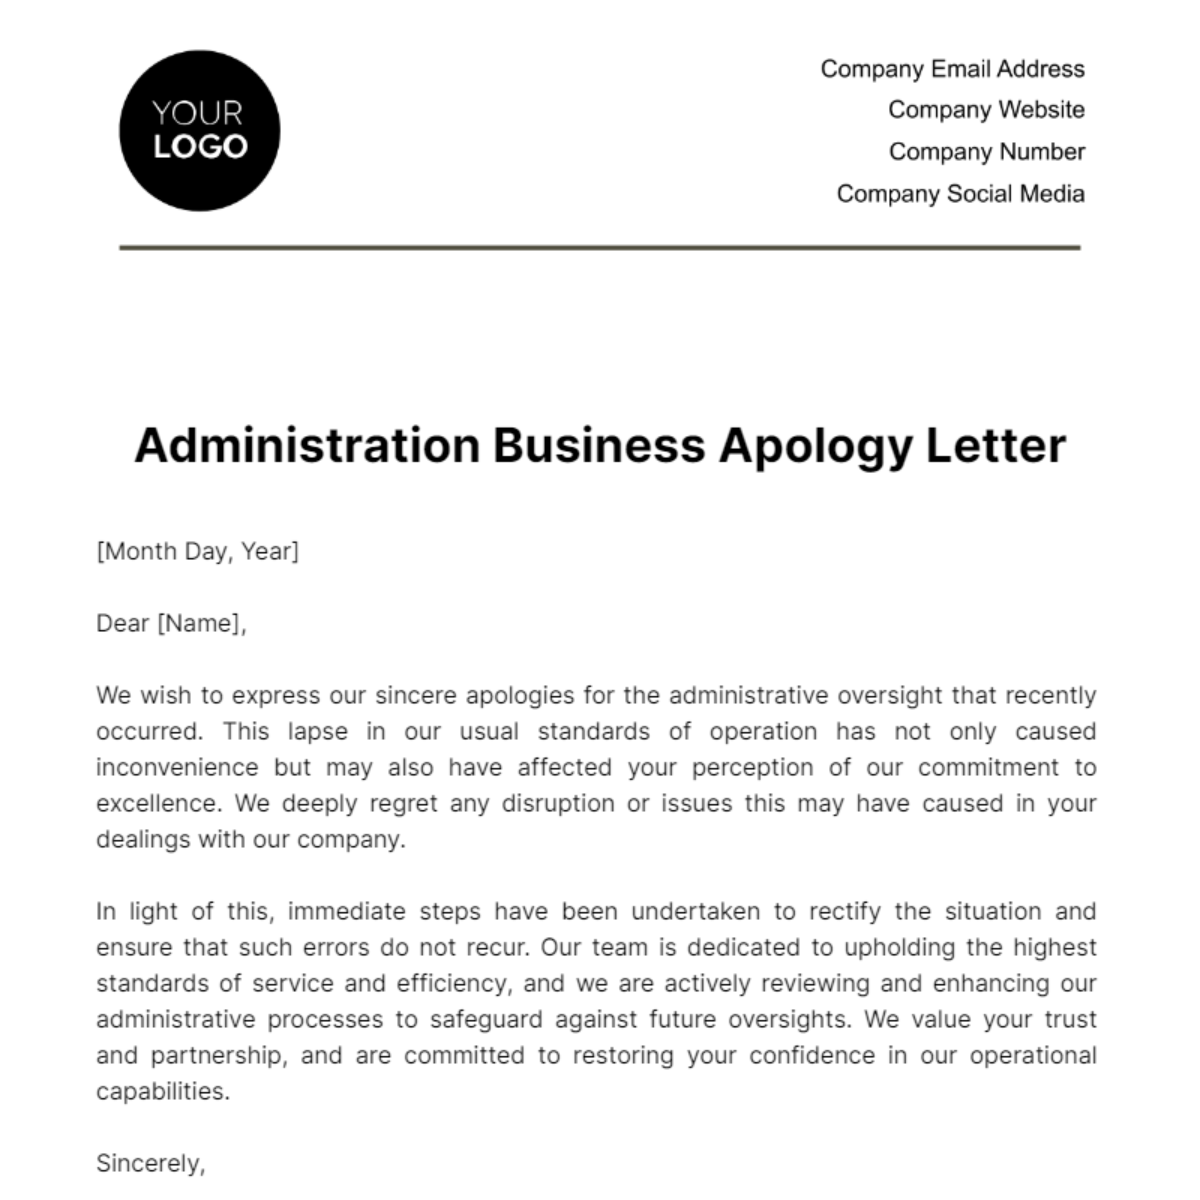 Free Administration Business Apology Letter Template